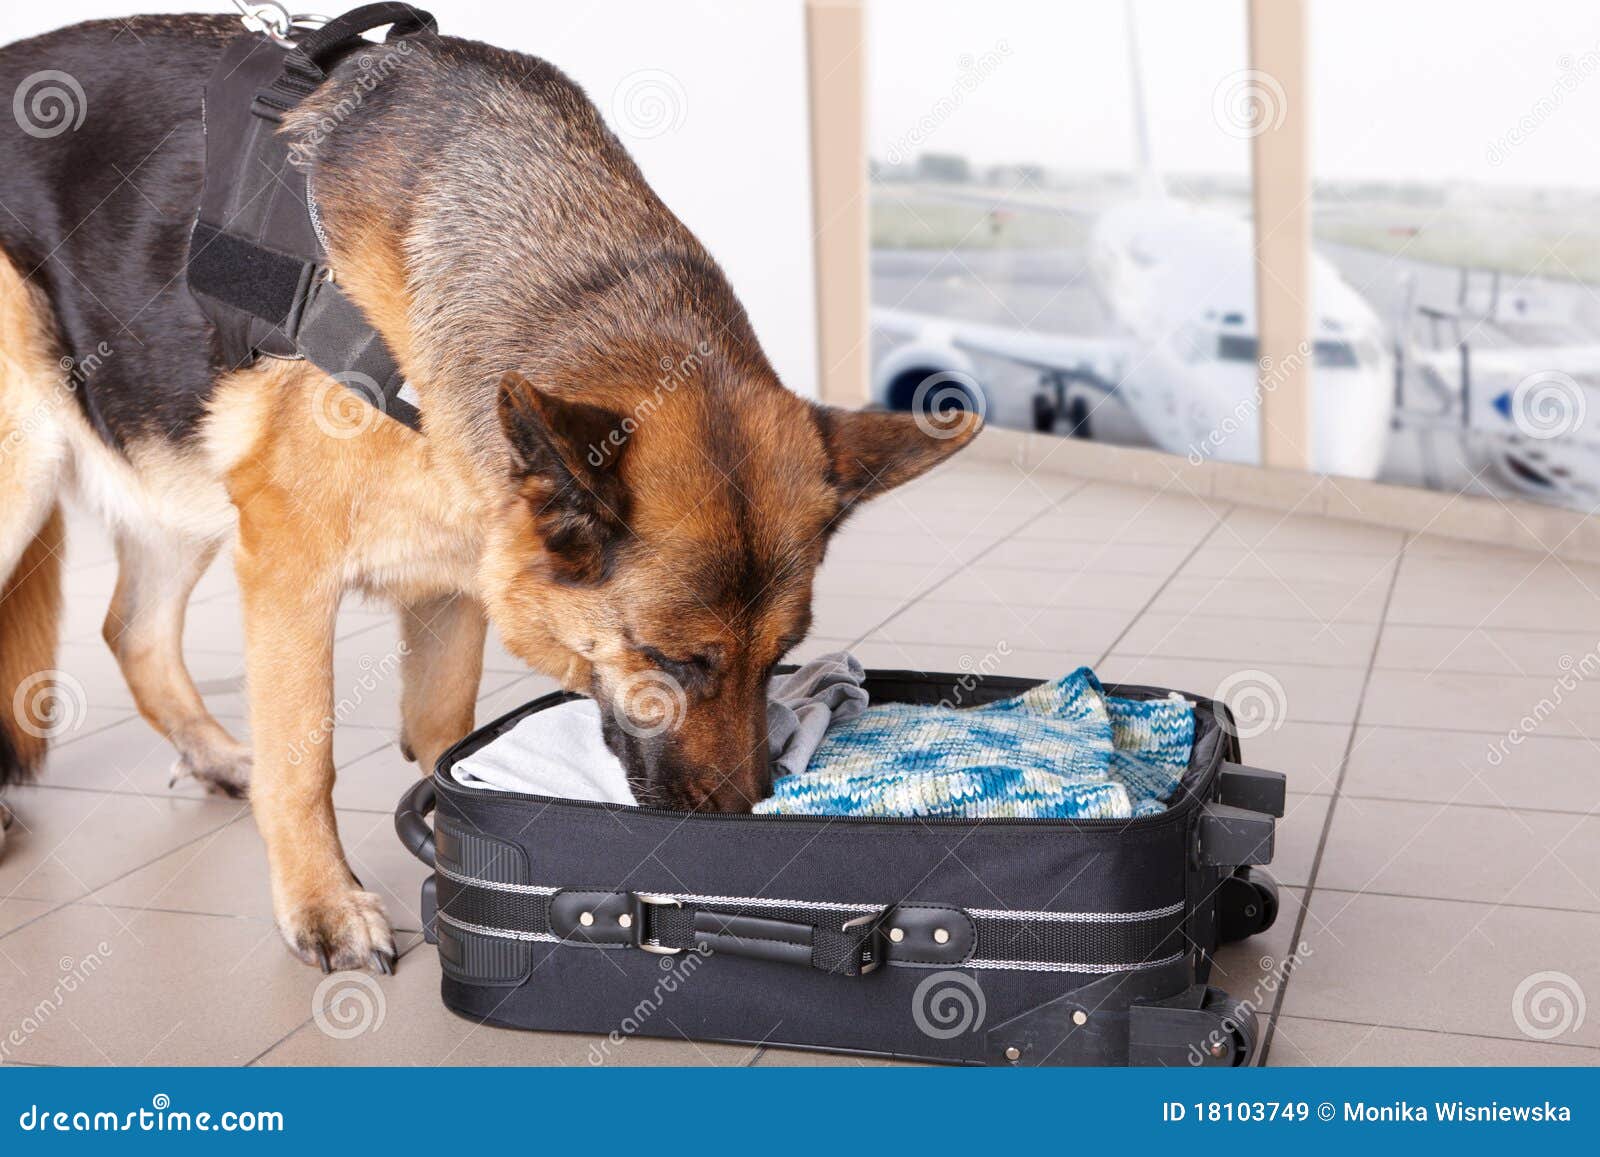 sniffing dog at the airport